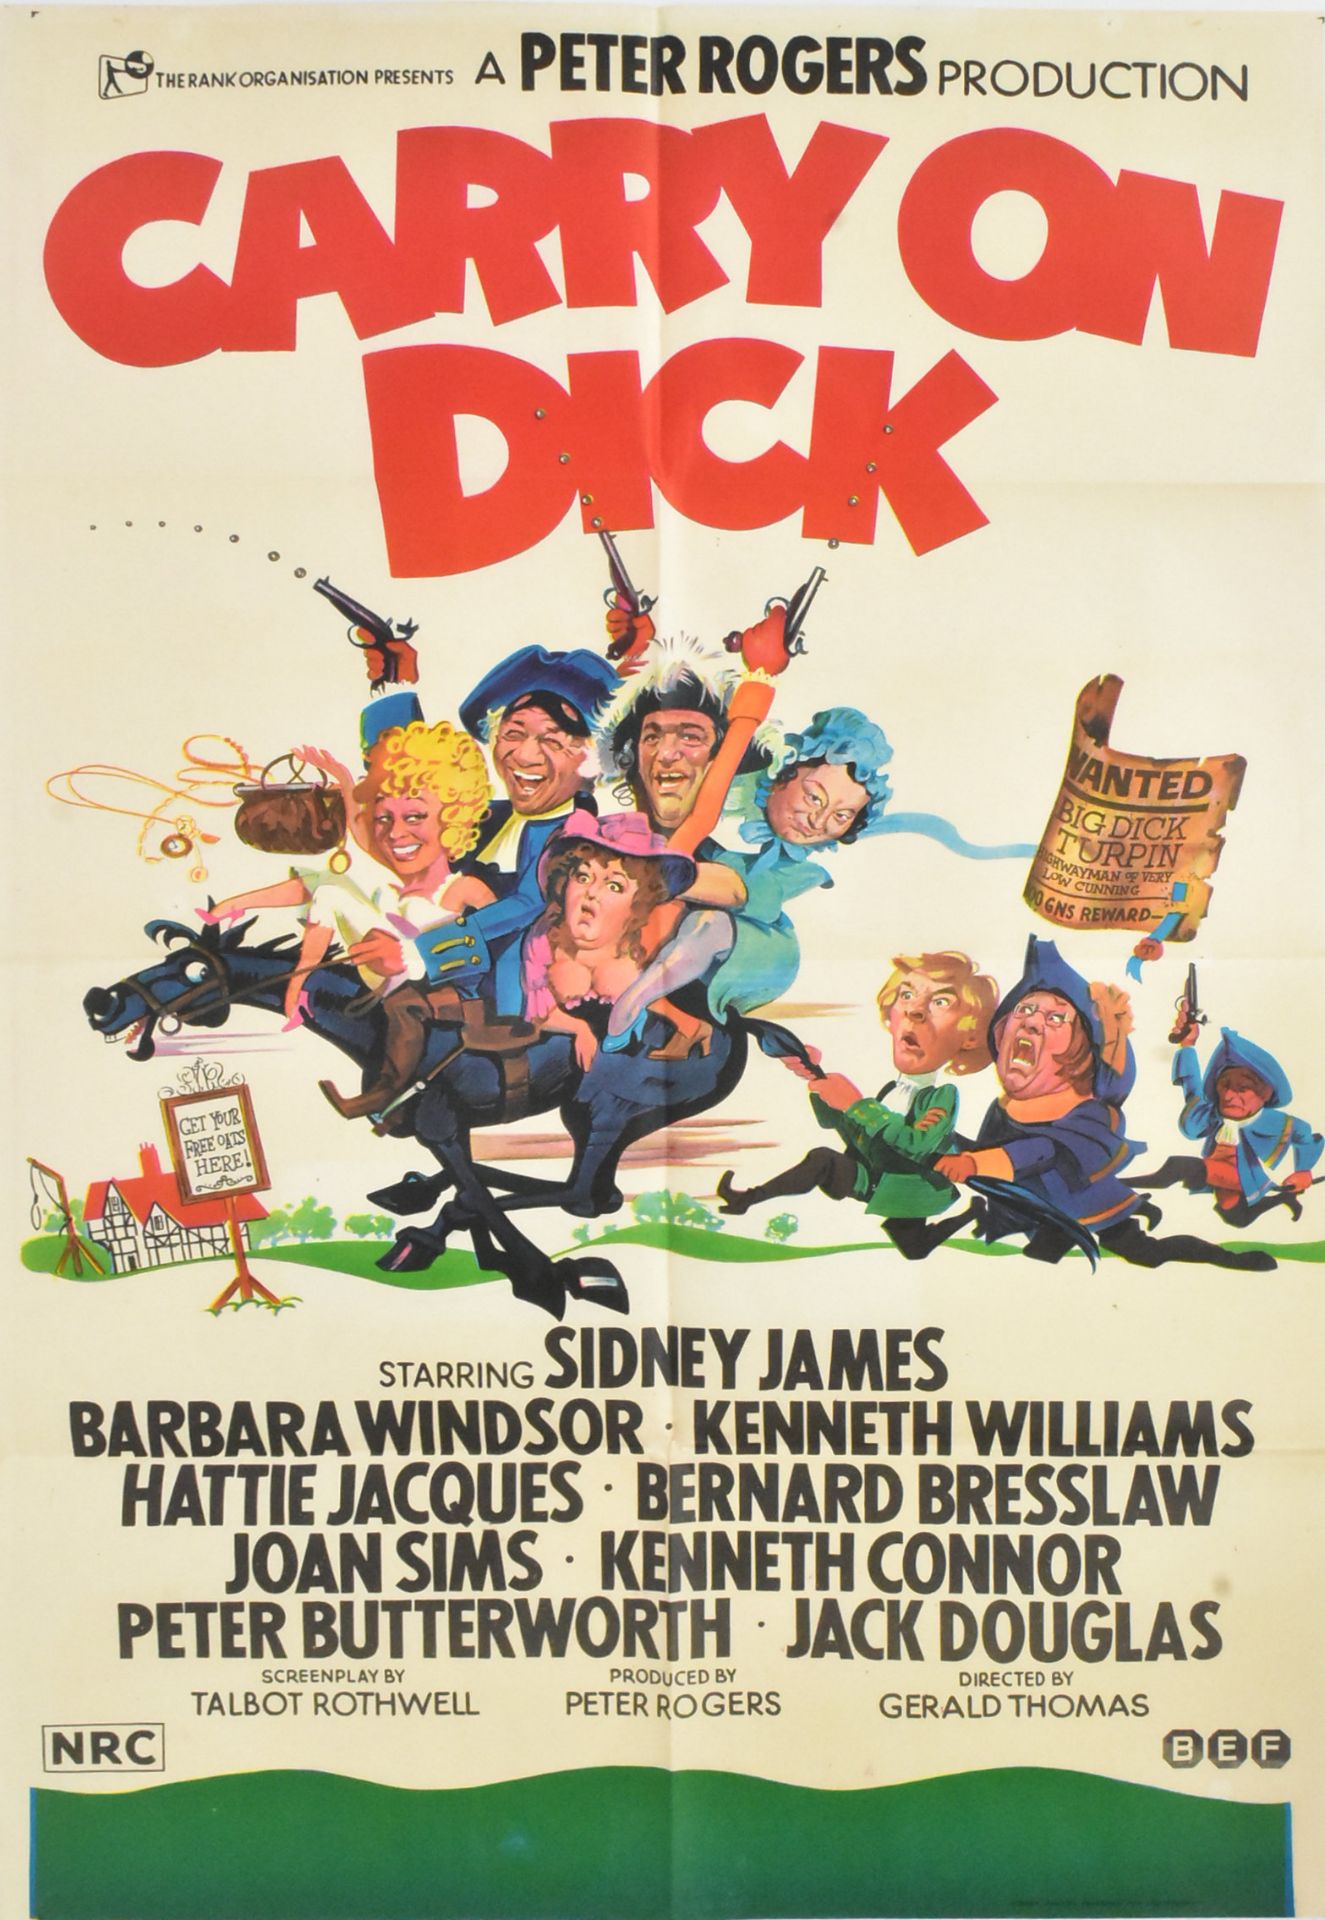 CARRY ON DICK (1974) - ORIGINAL AUSTRALIAN ONE SHEET MOVIE POSTER - Image 2 of 5